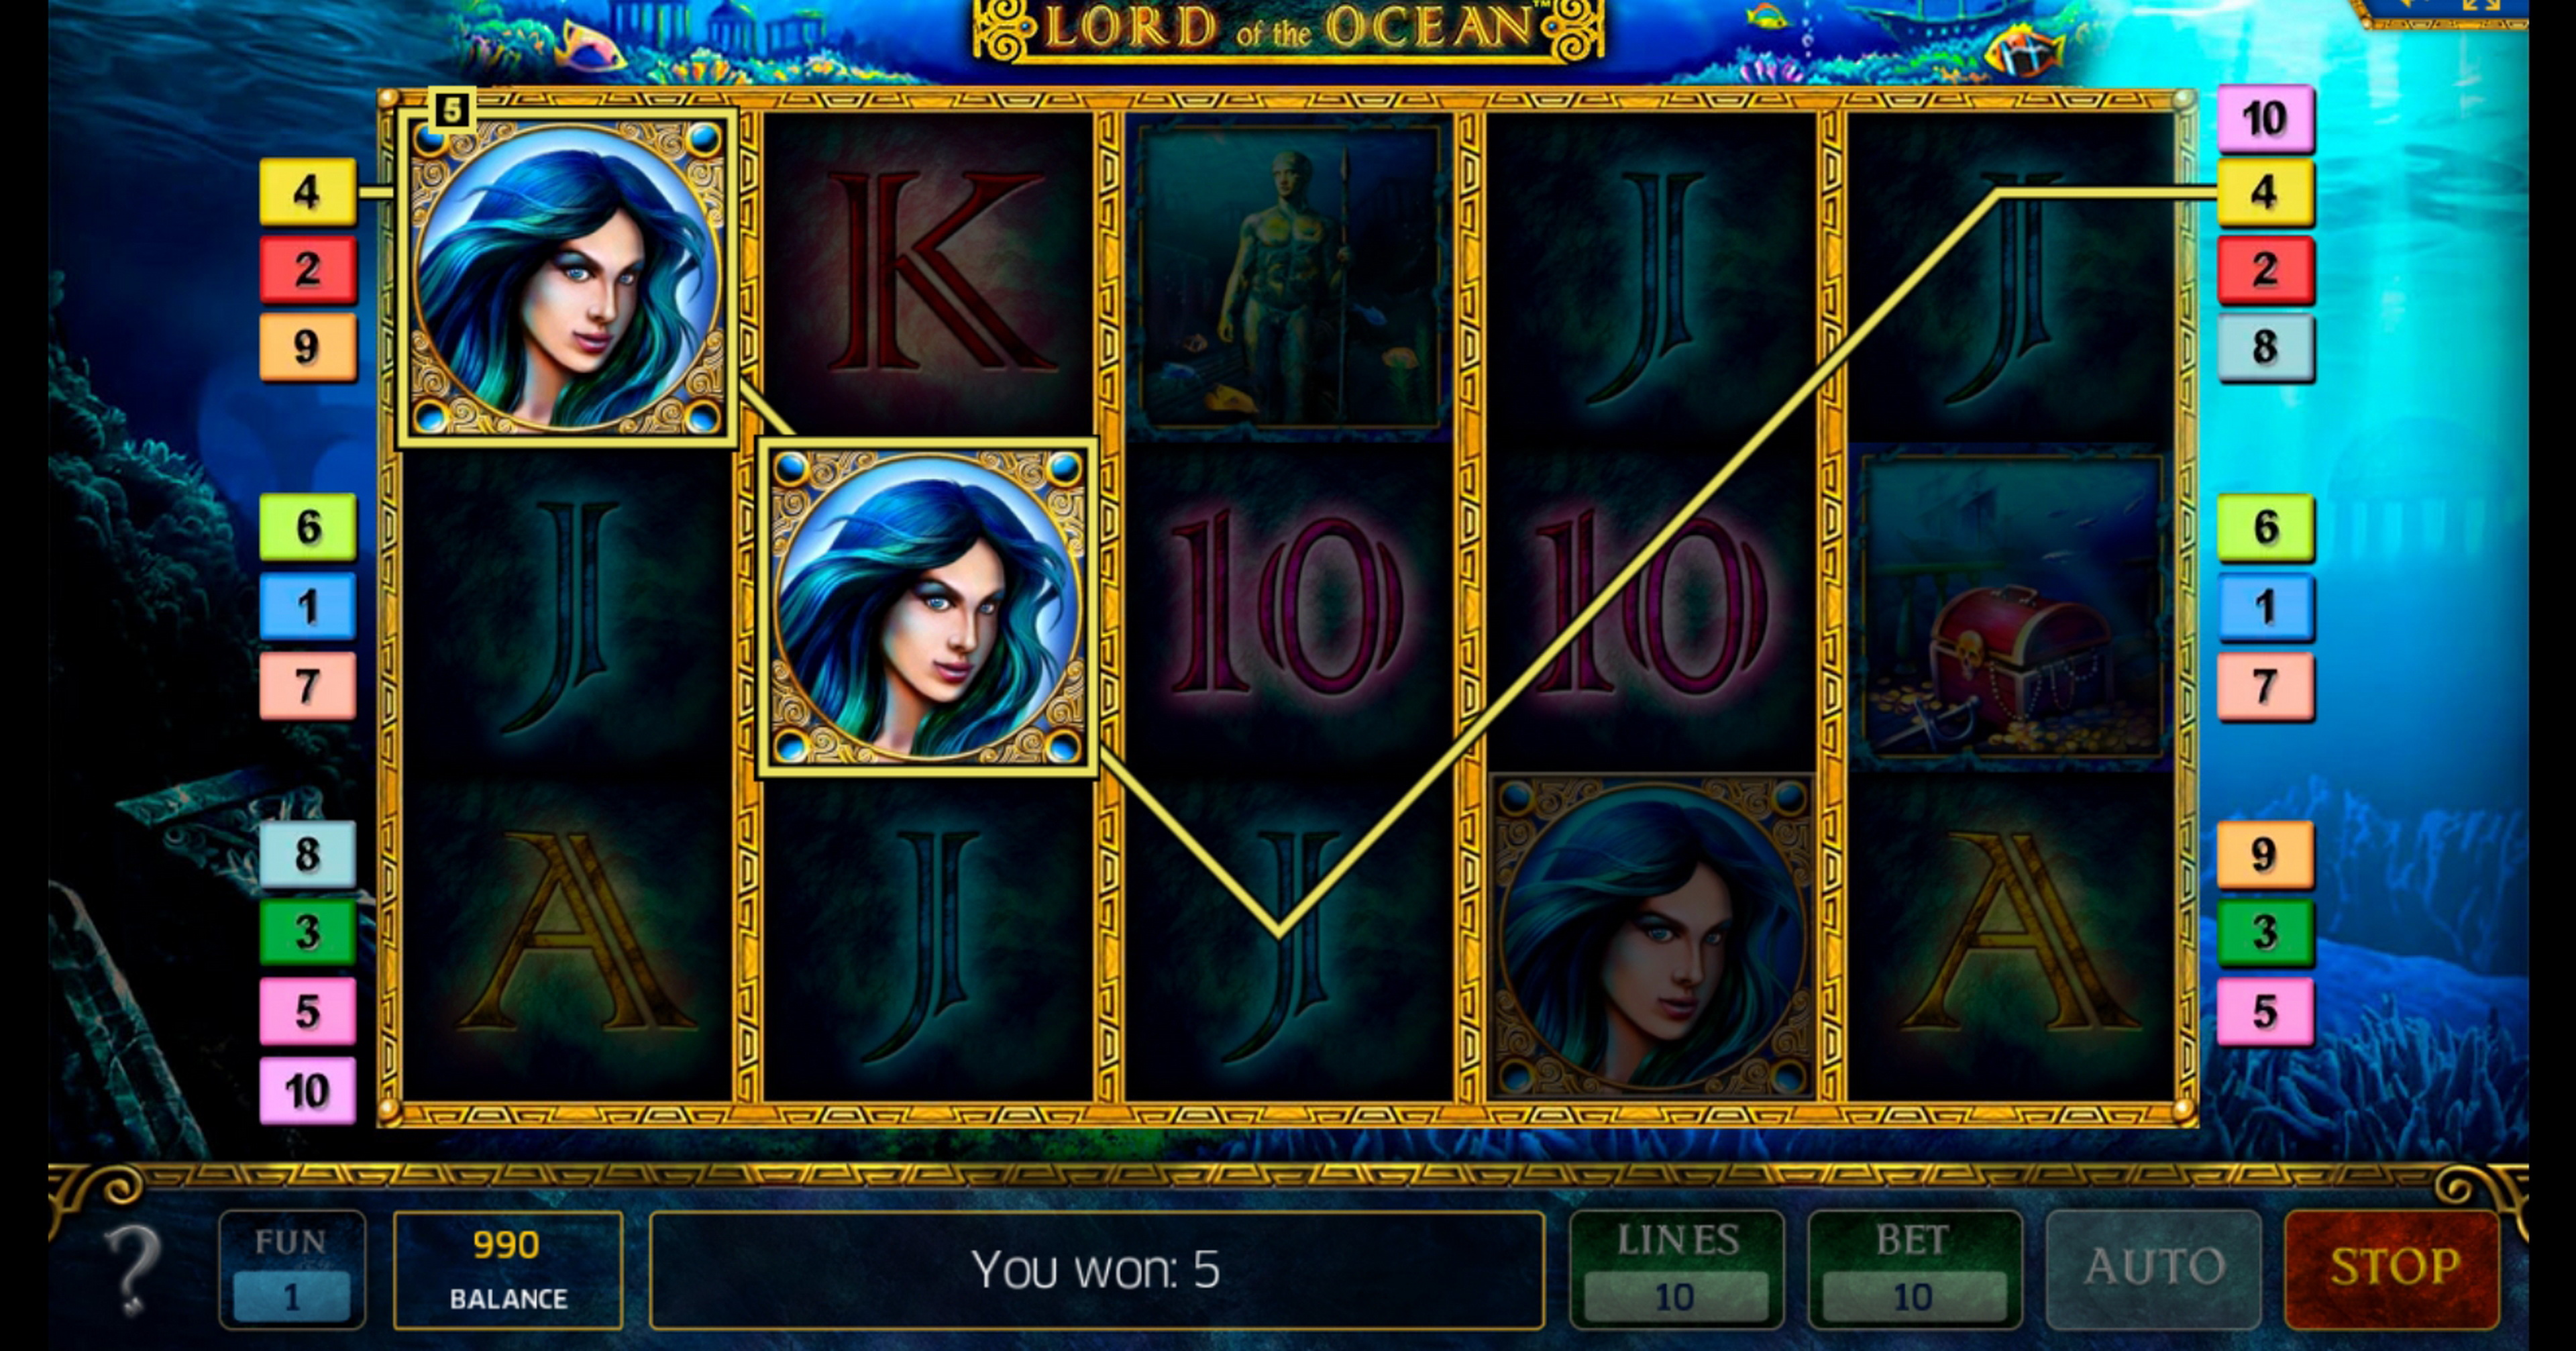 Win Money in Lord of the Ocean Free Slot Game by Greentube